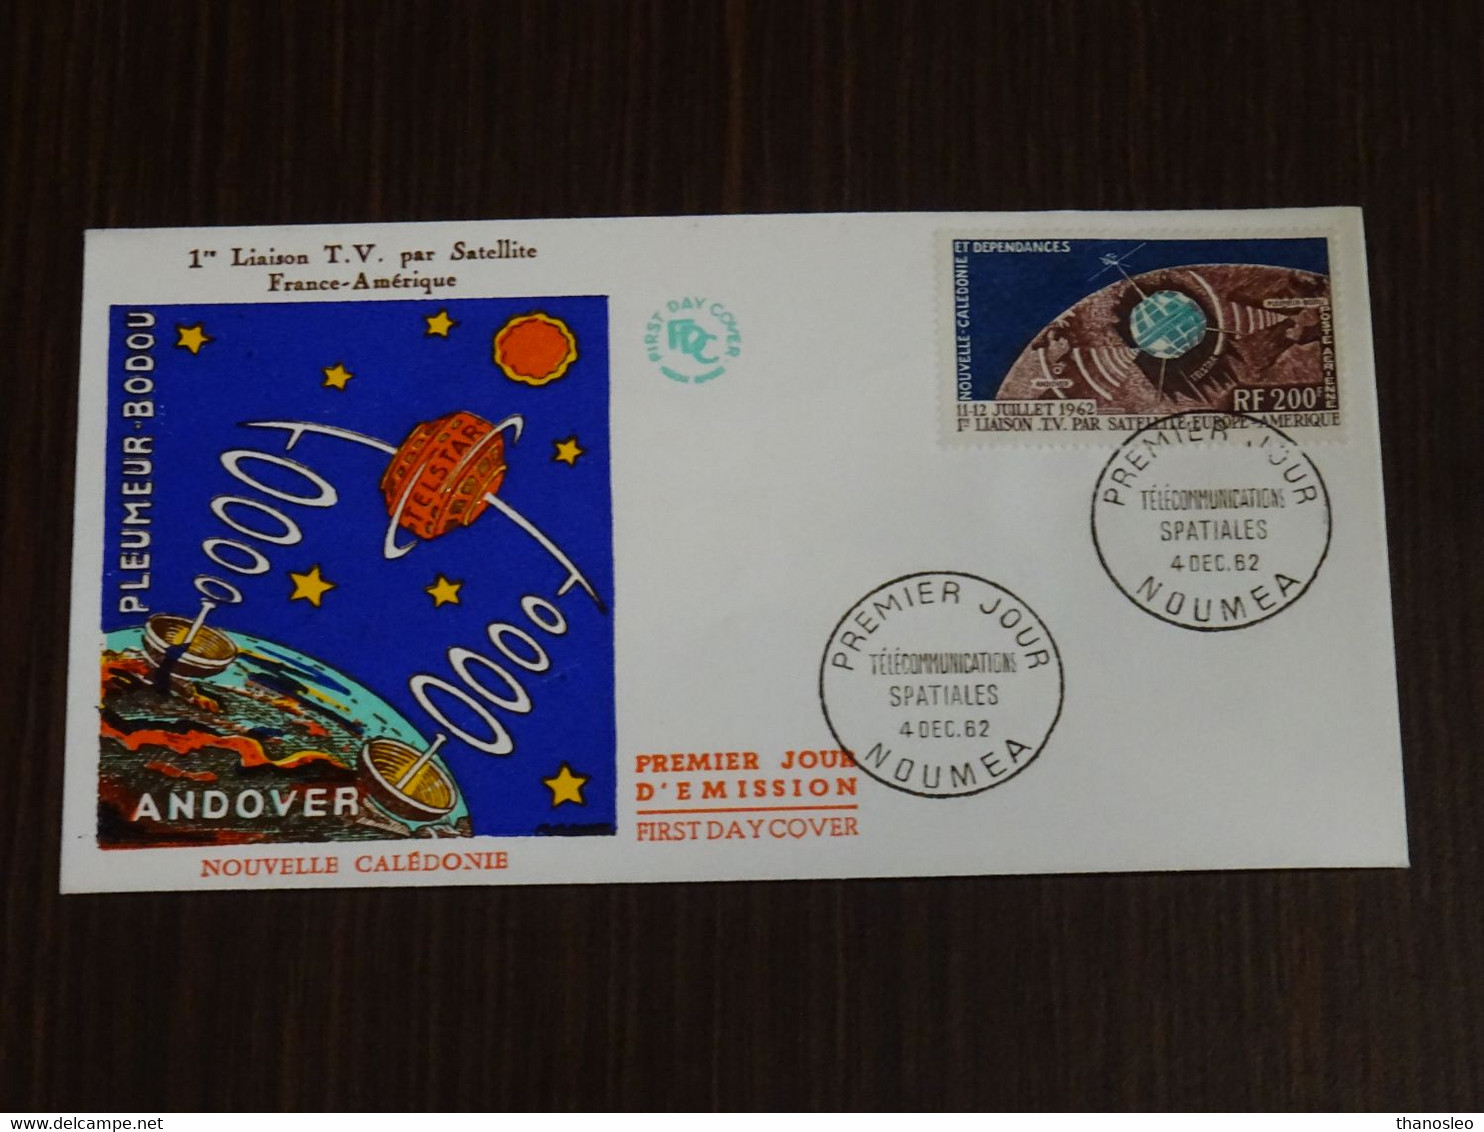 Nouvelle Caledonie 1962 Space, Telecommunications Spatiales FDC VF - Oceanía